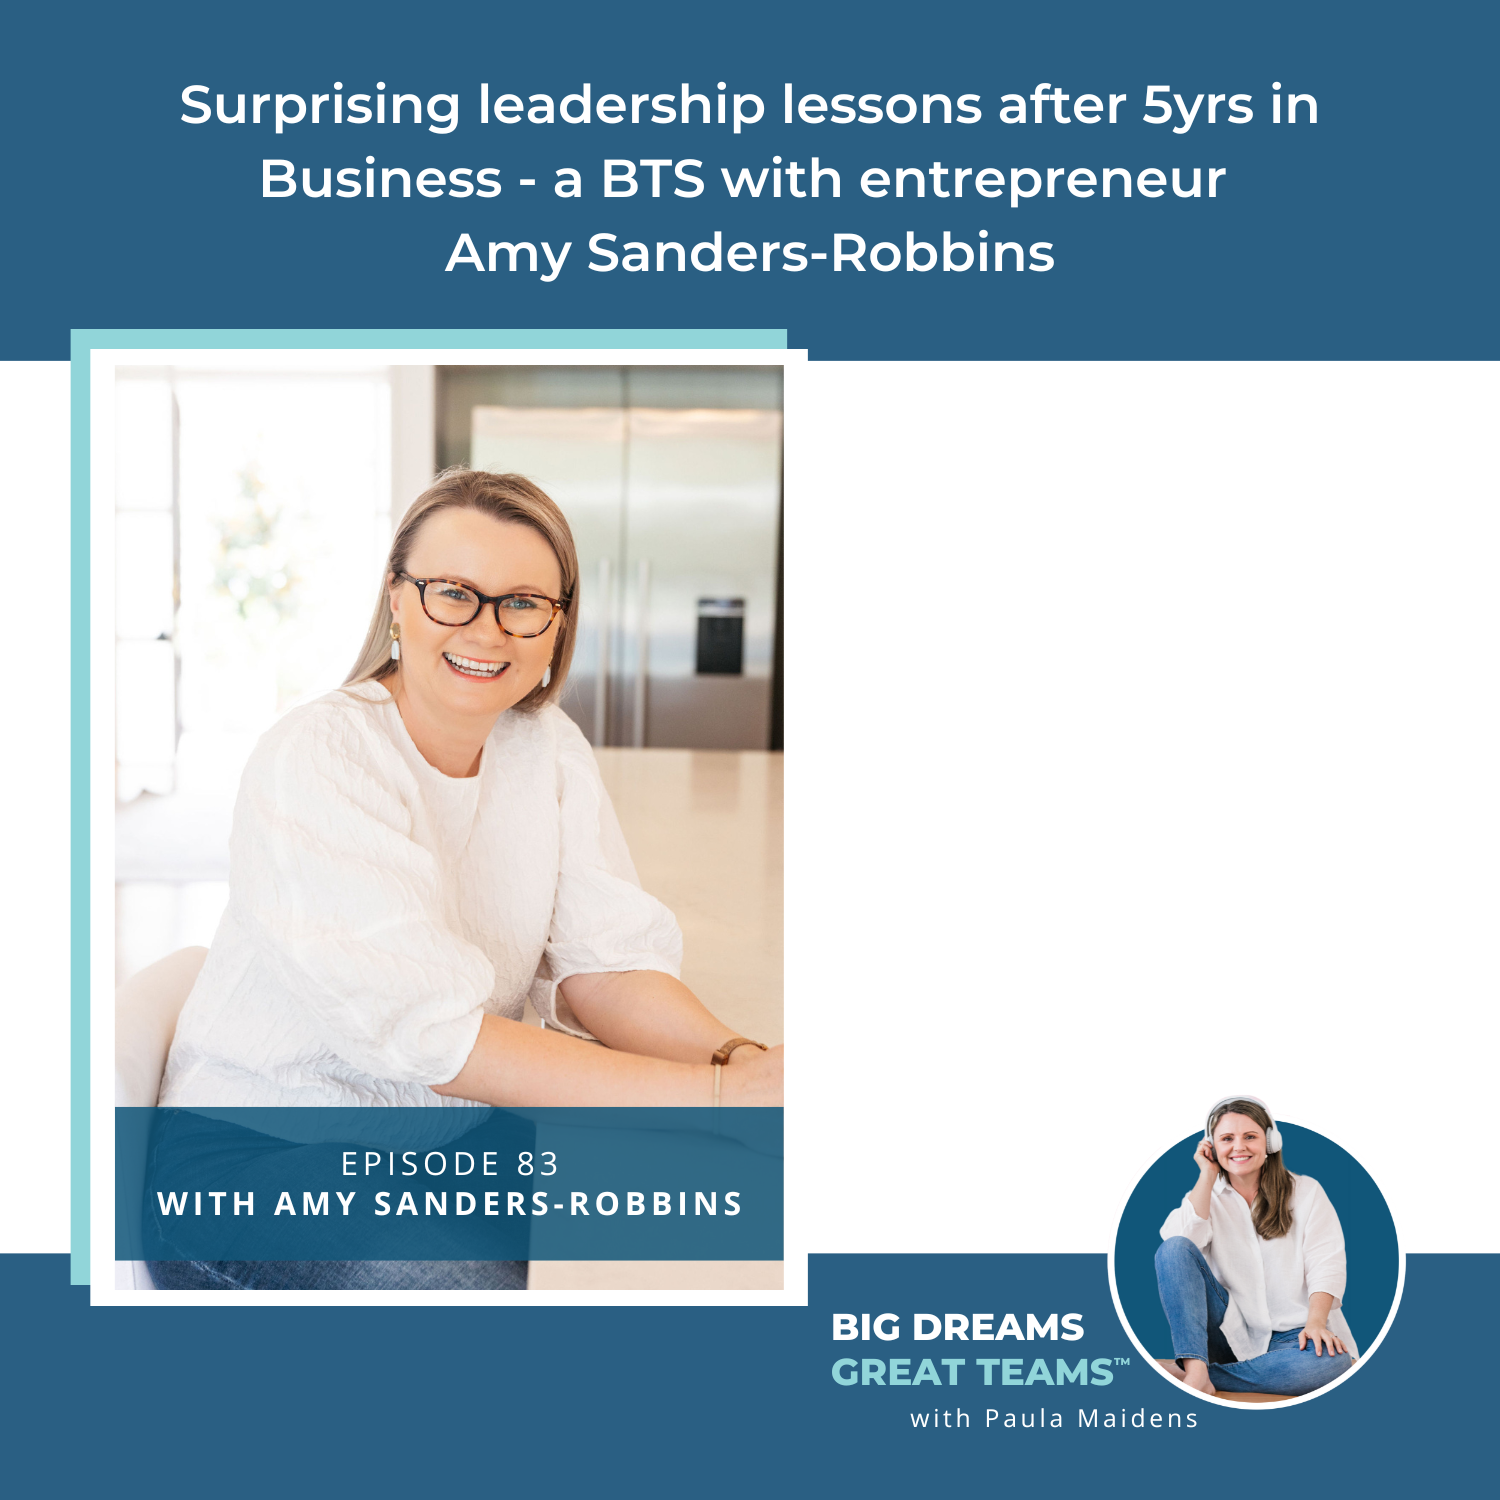 Surprising Leadership Lessons after 5yrs in Business - a BTS with Entrepreneur Amy Sanders-Robbins